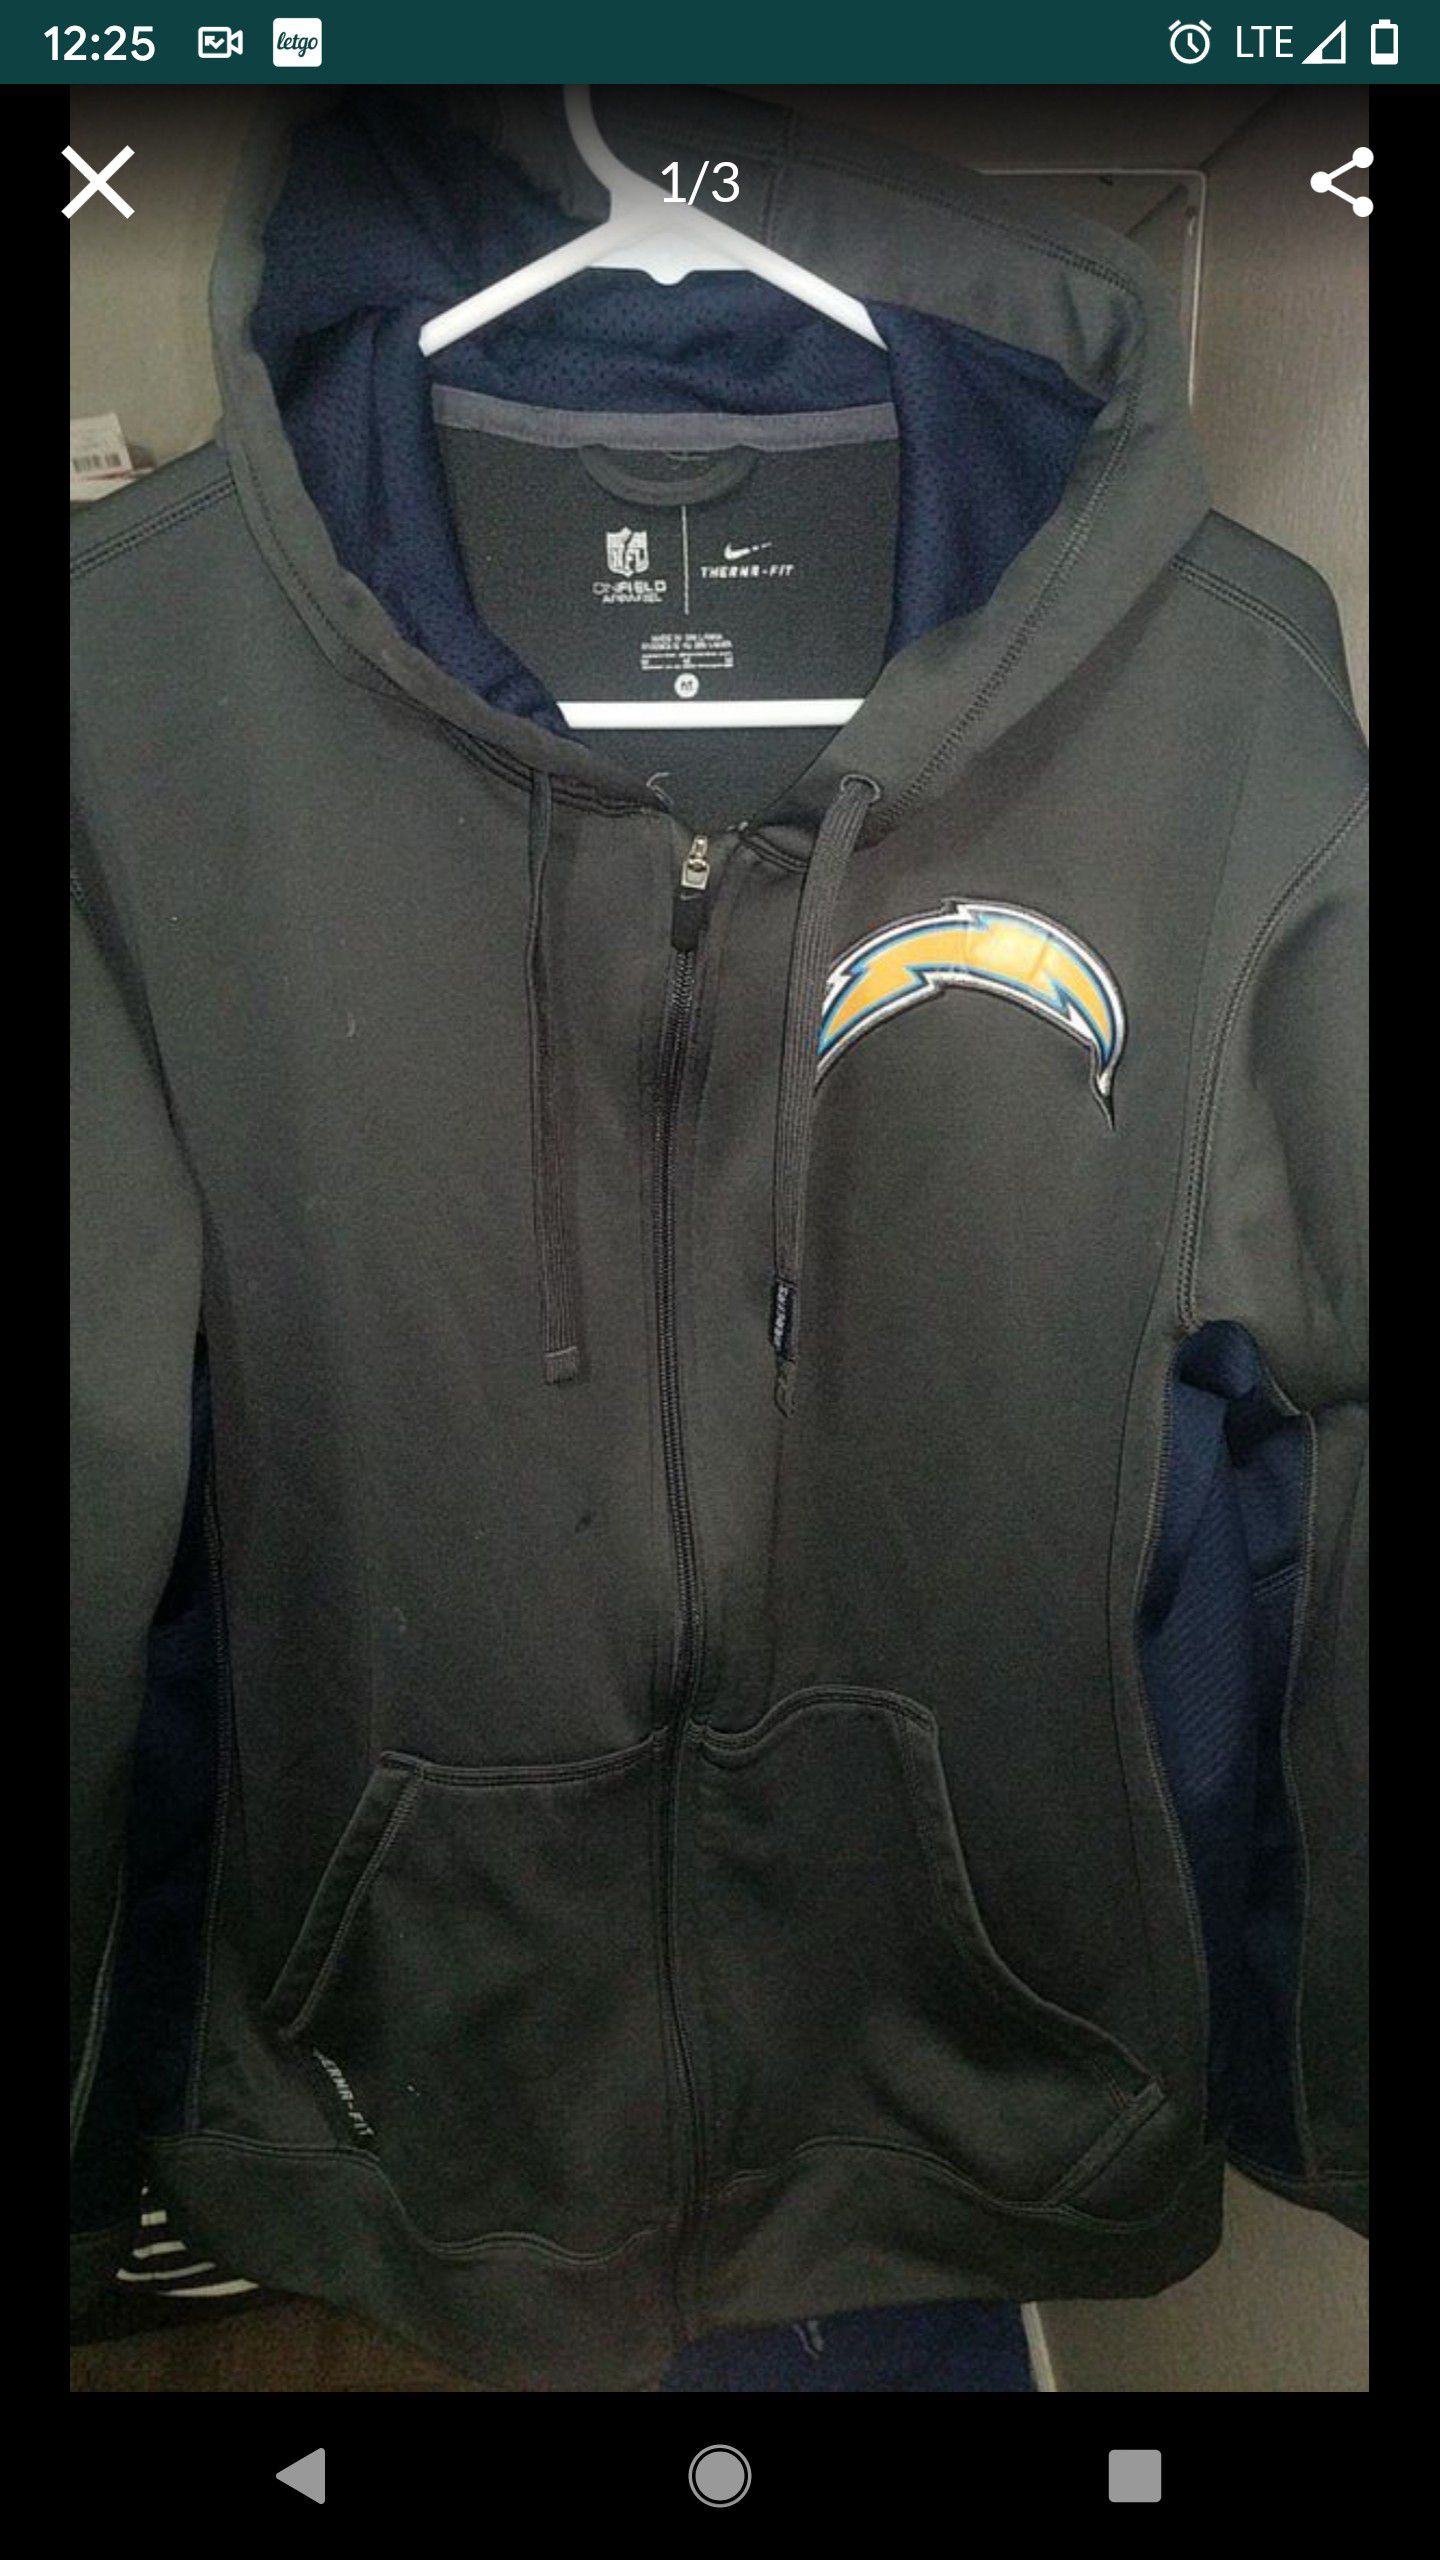 Chargers therma fit jacket